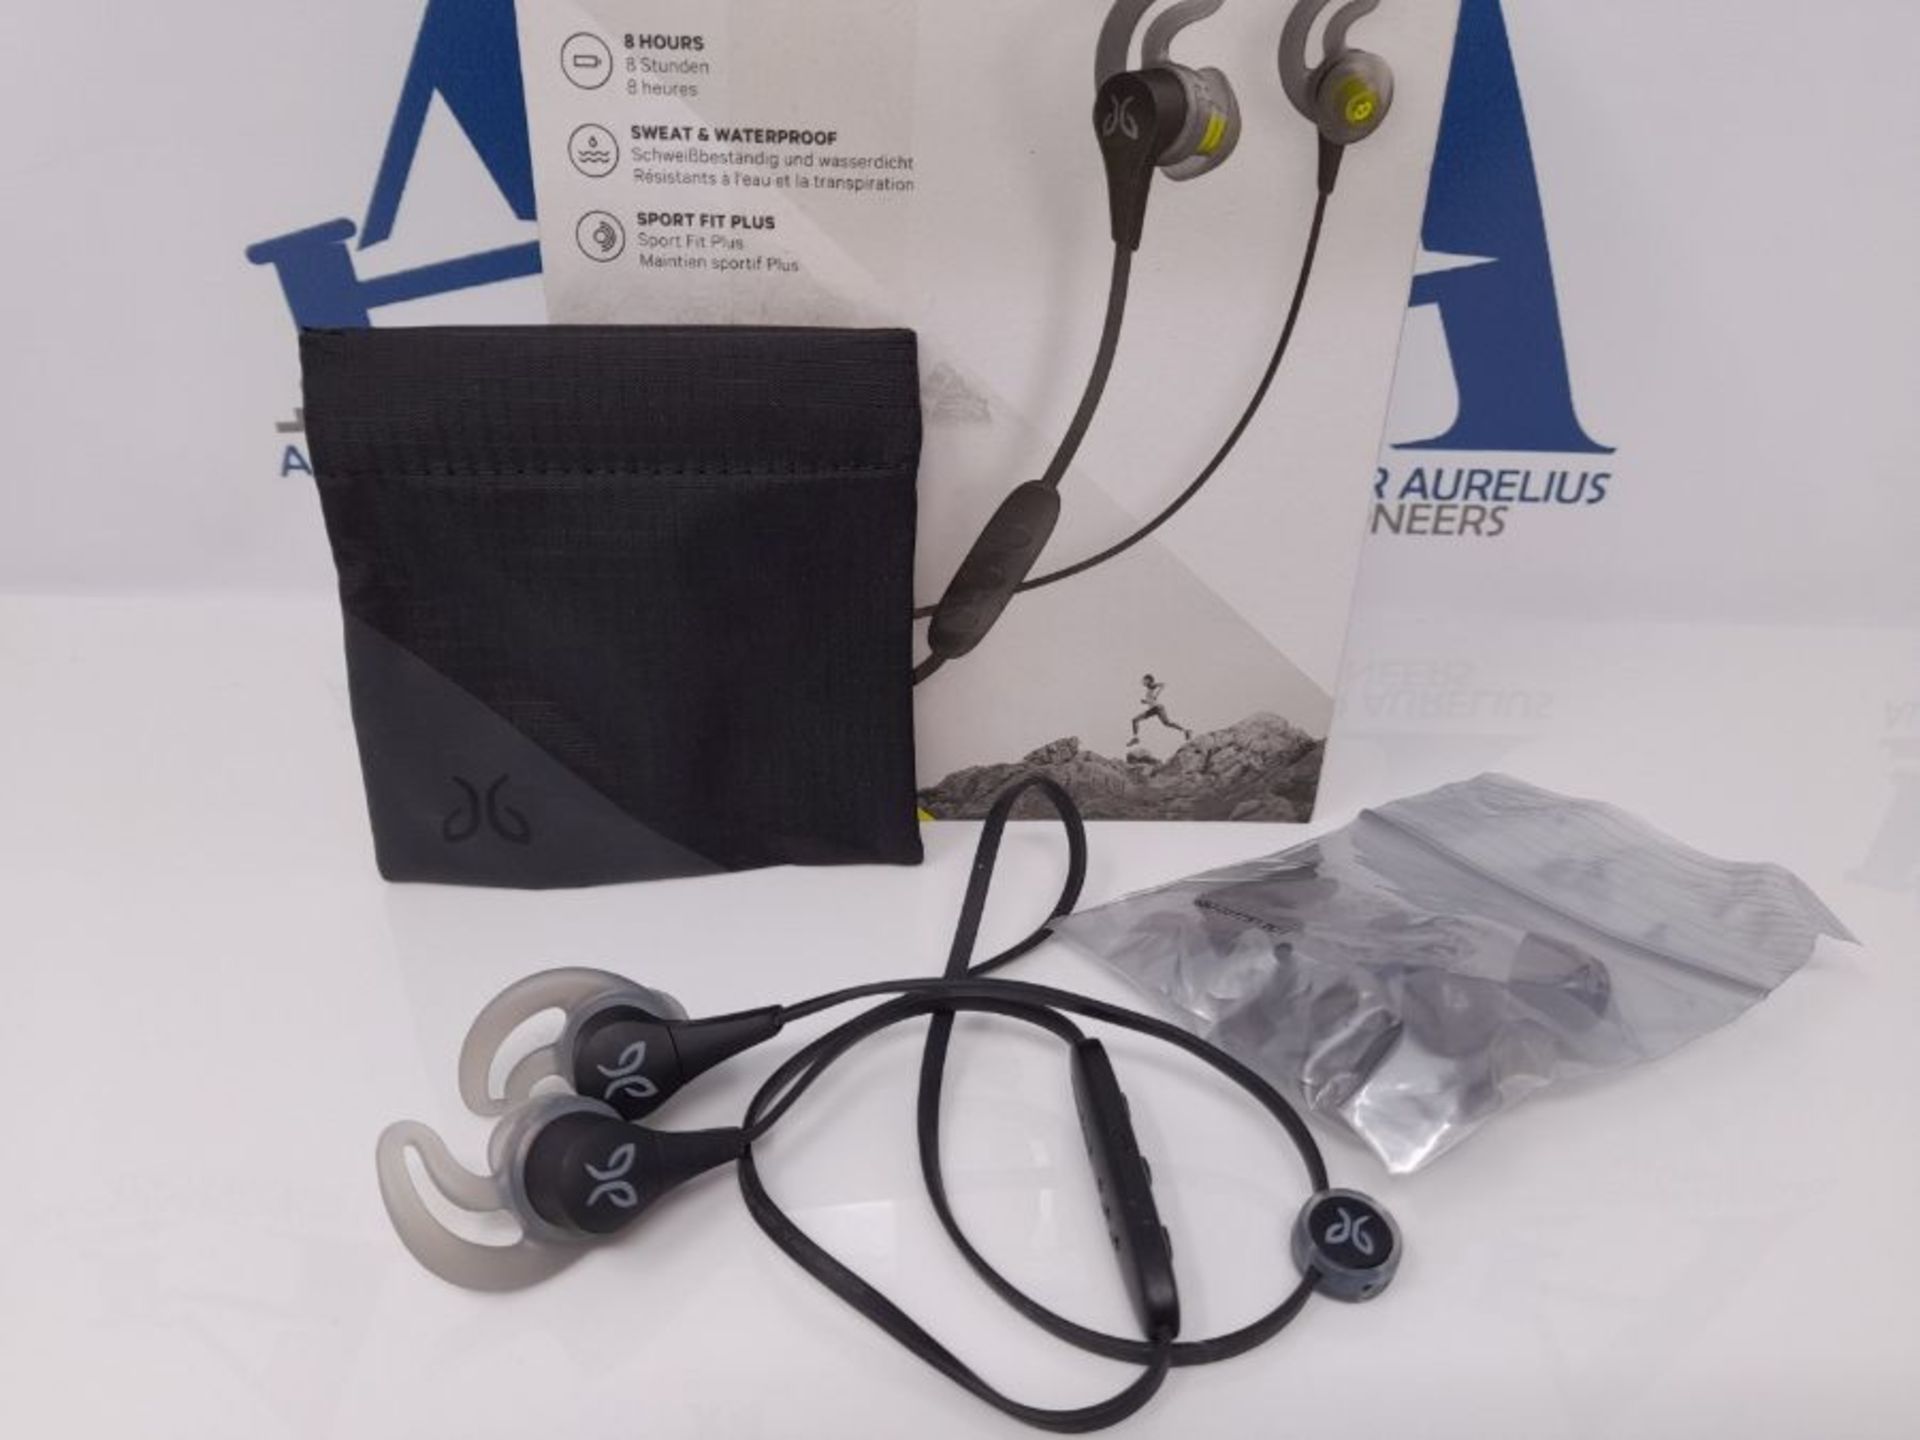 RRP £94.00 Jaybird X4 Wireless Bluetooth In-Ear Headphones with Microphone, For Sports, Running a - Image 2 of 3